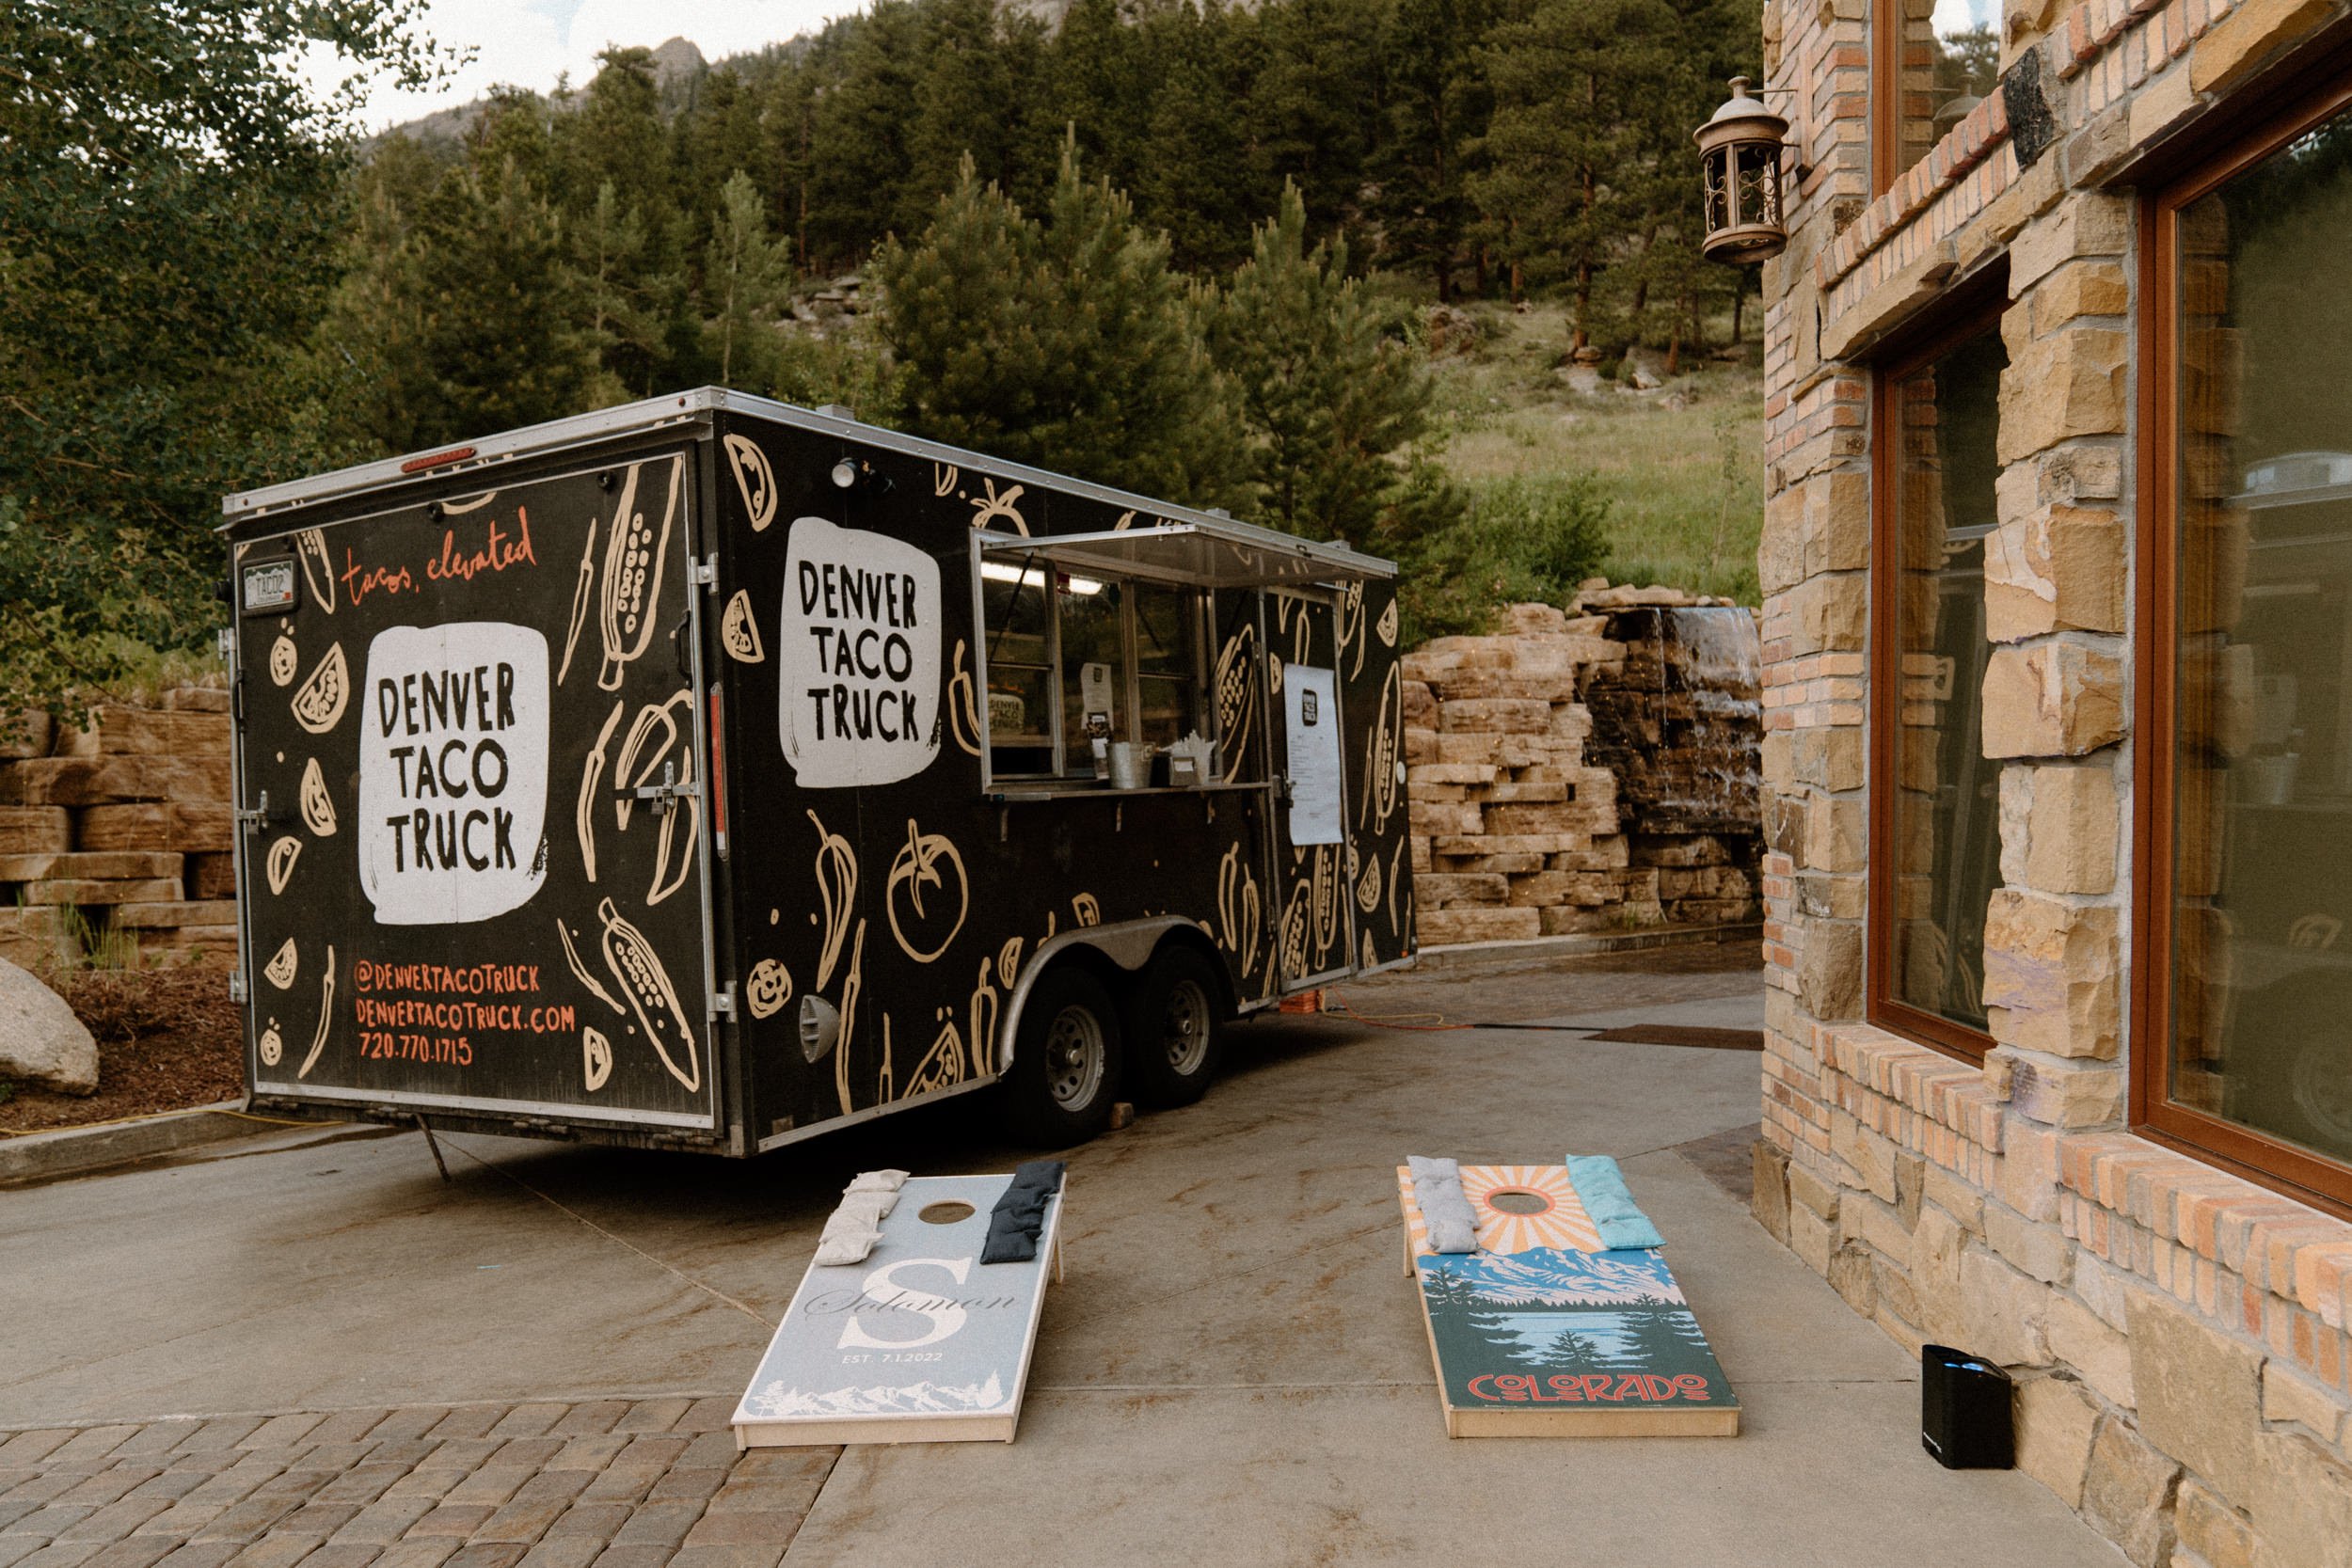 The Denver Taco Truck parked outside of the Della Terra Mountain Chateau in Estes Park, CO